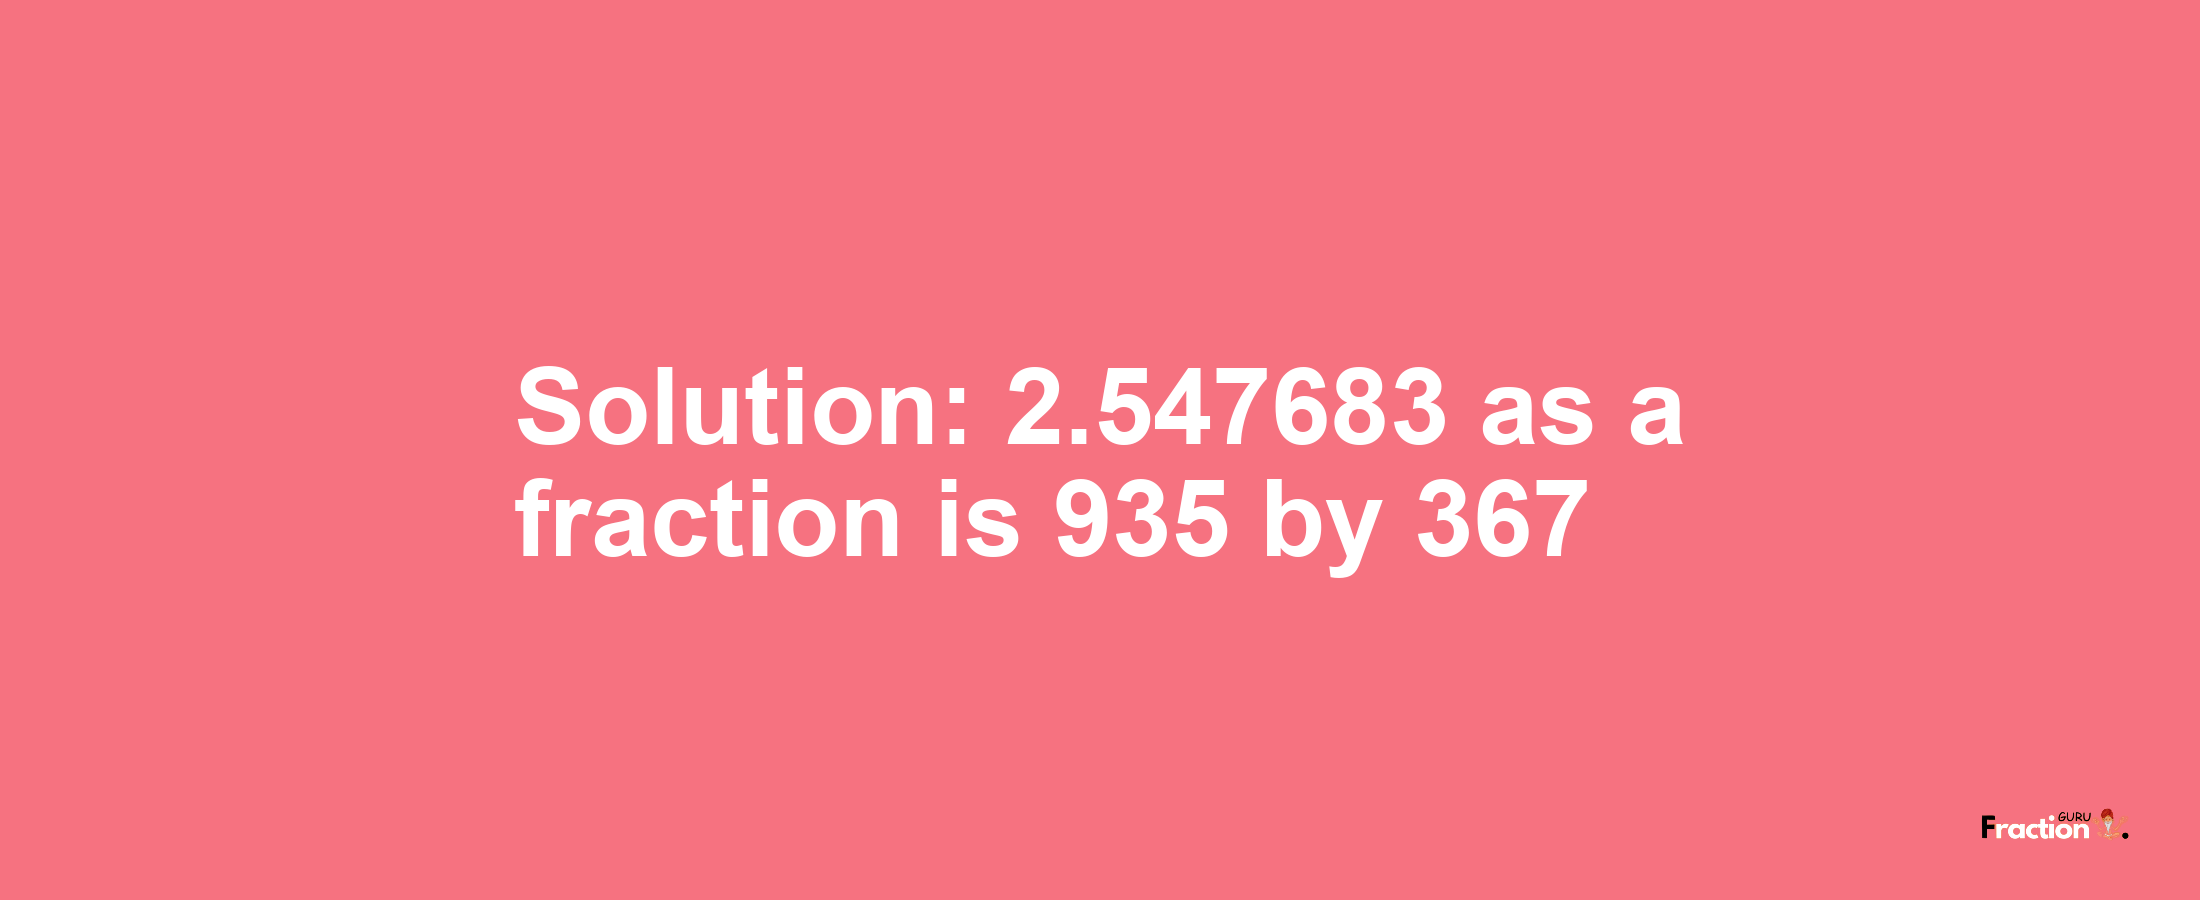 Solution:2.547683 as a fraction is 935/367